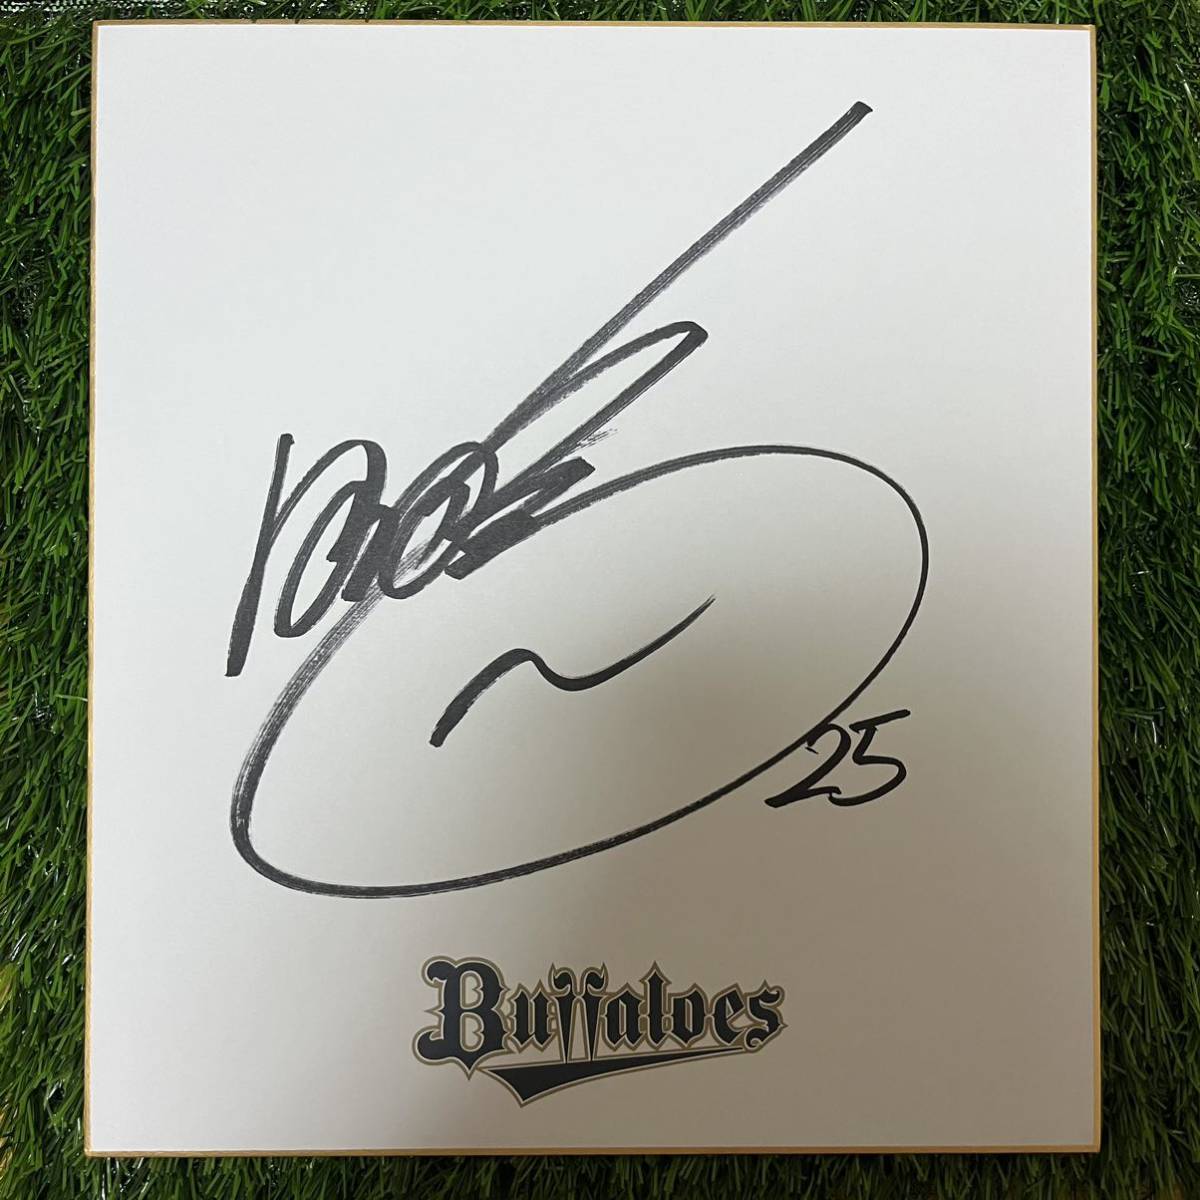 Orix Buffaloes Peng Naito #25 Autographed colored paper, baseball, Souvenir, Related goods, sign